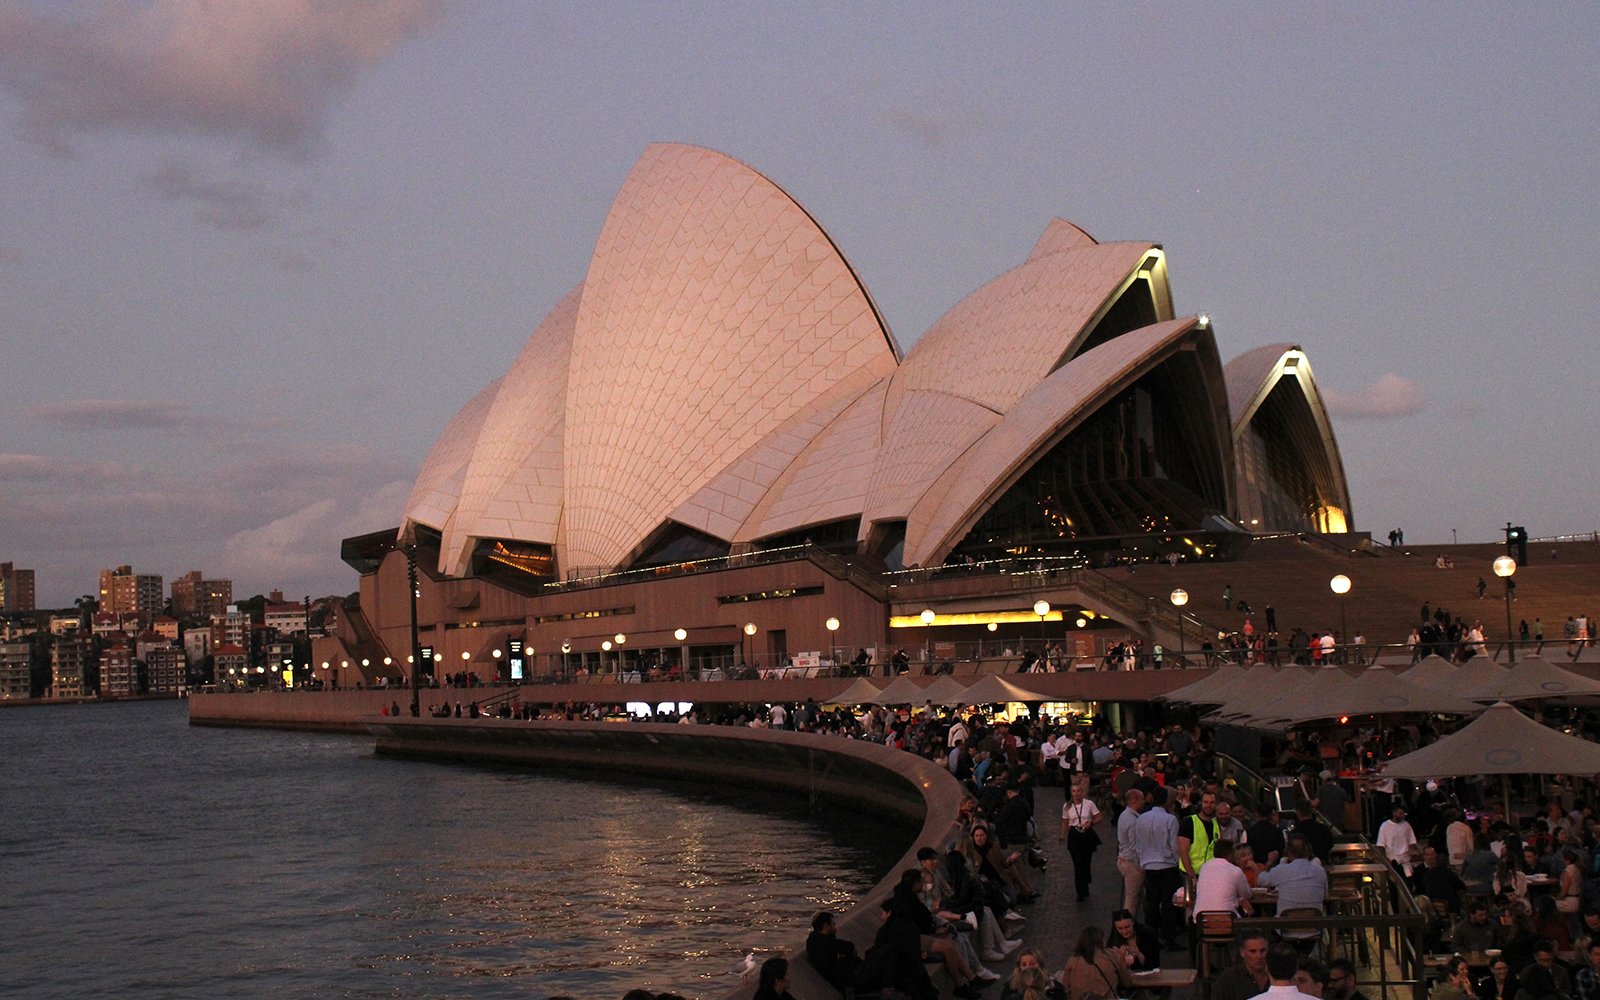 Crowd in front of white building with striking curved segments of roof, overlooking body of water